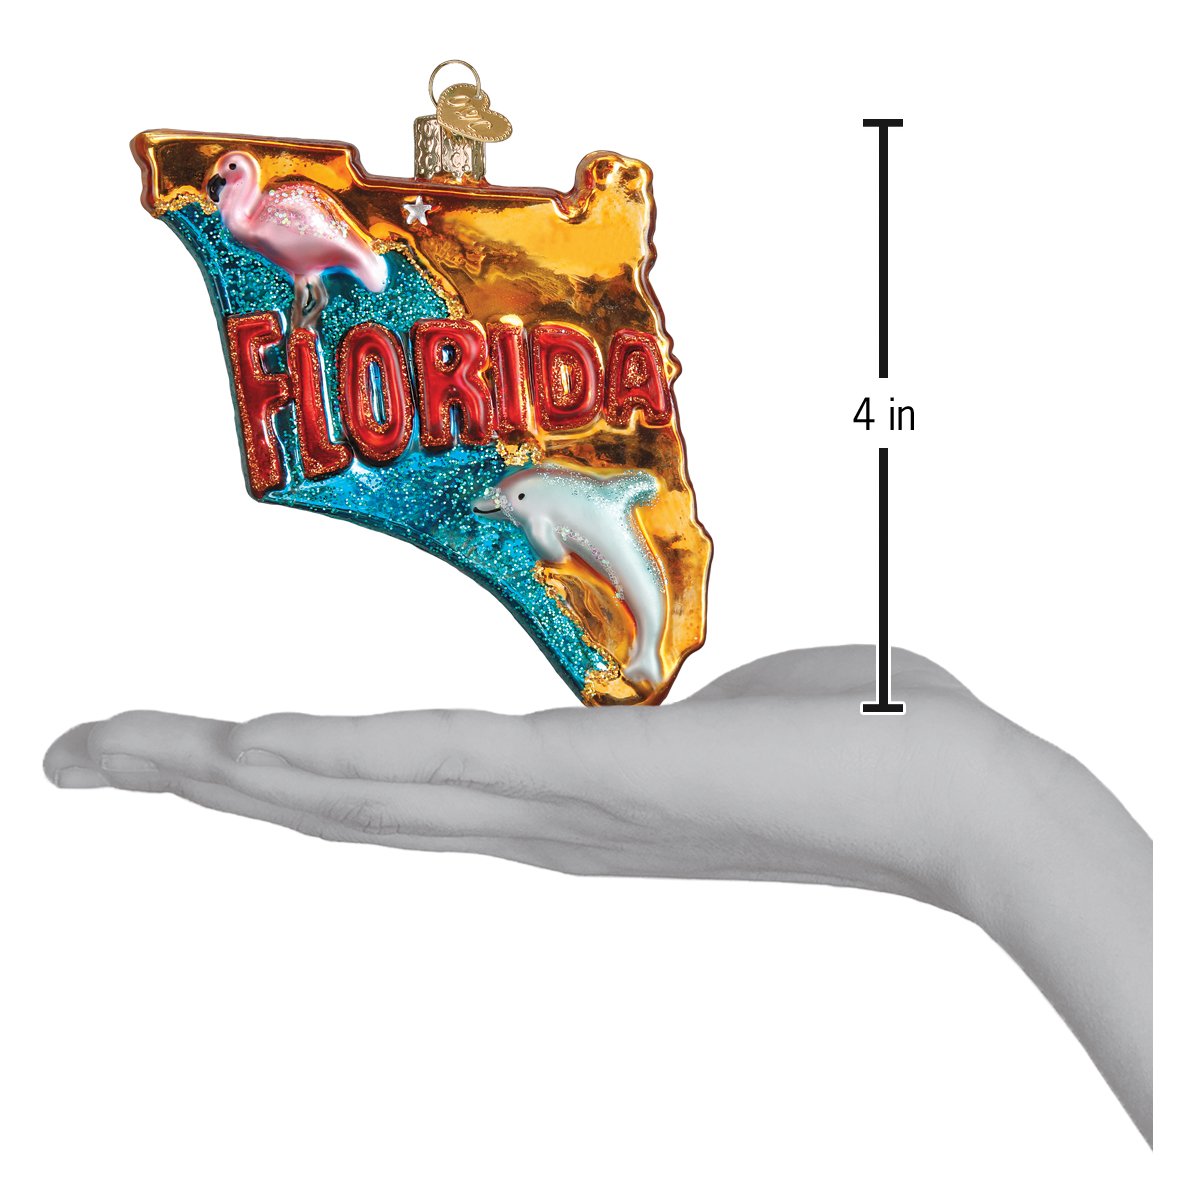 State Of Florida Ornament